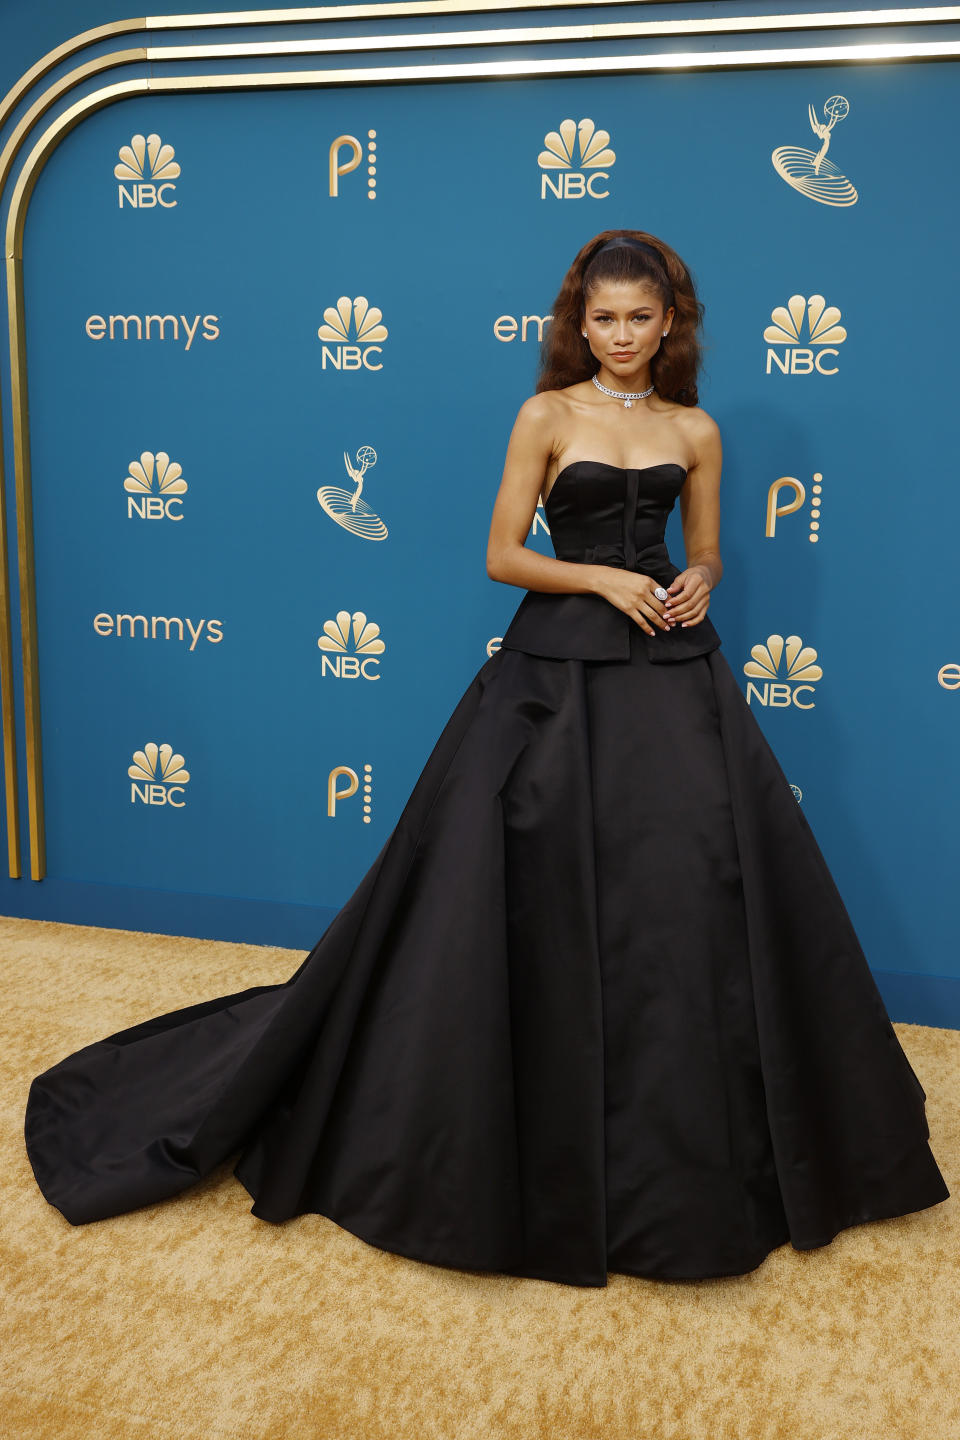 Zendaya in a Valentino gown and Bulgari diamond necklace. - Credit: NBC via Getty Images